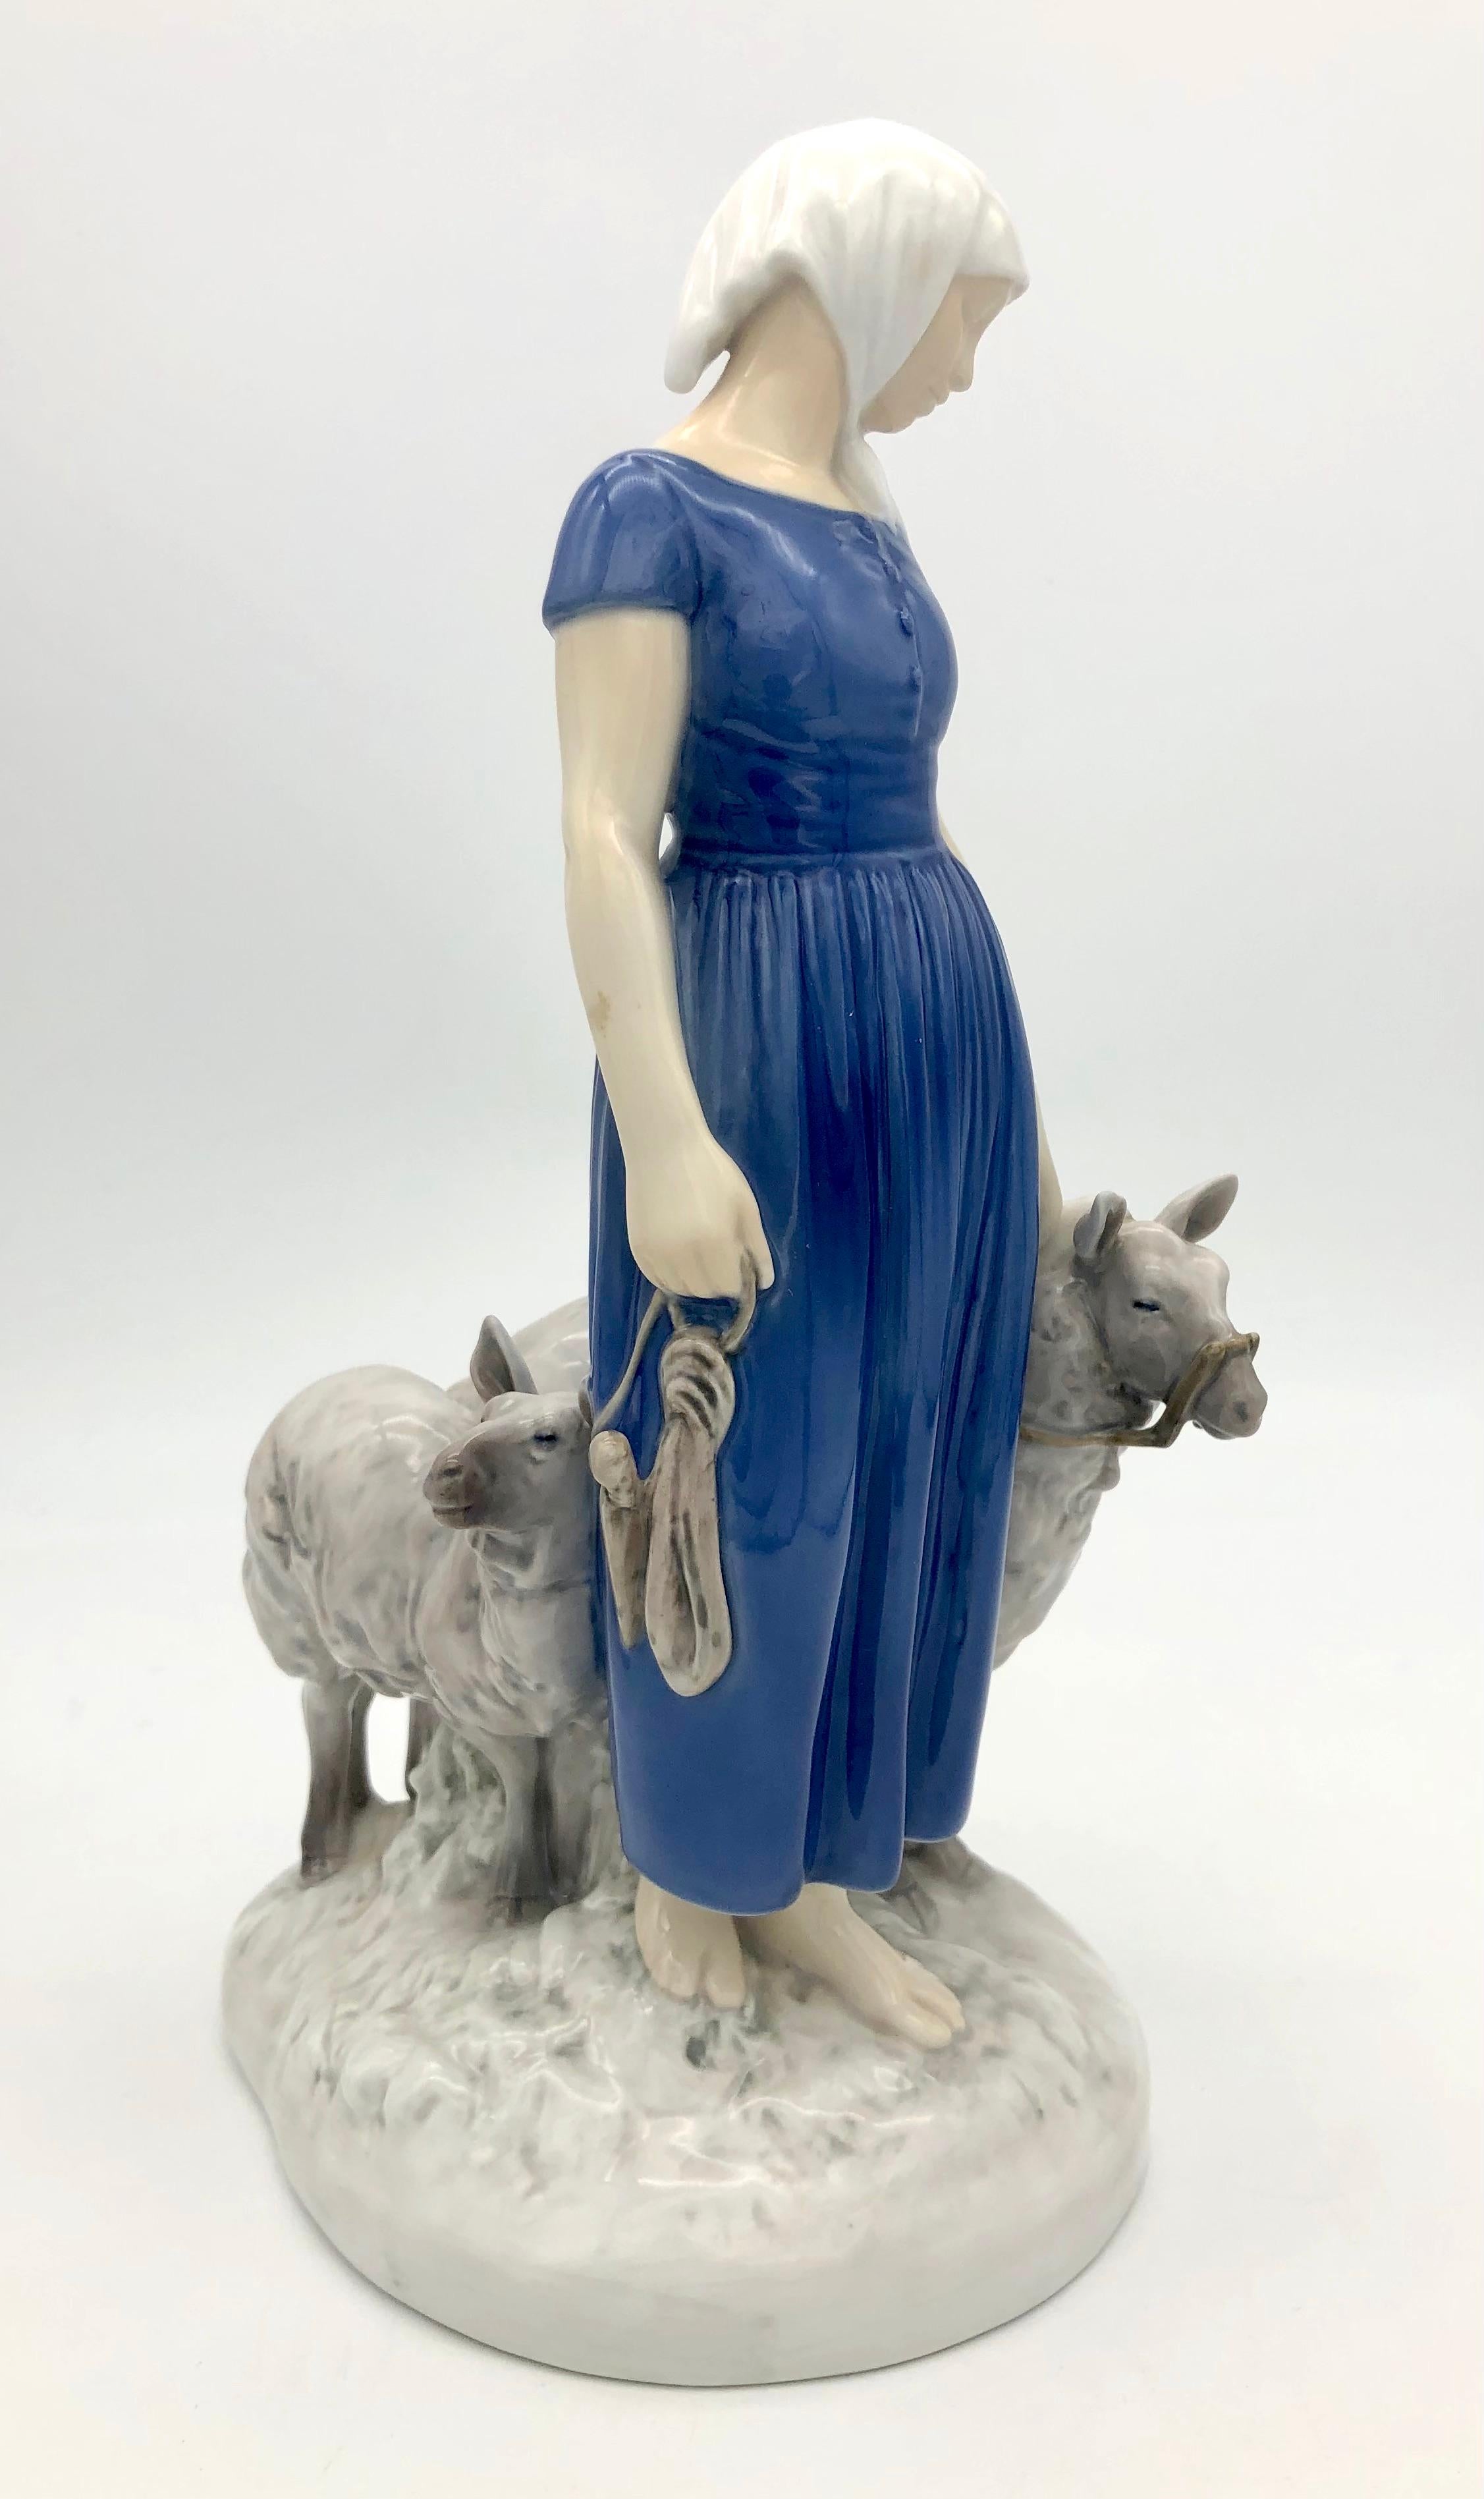 This young sheperdess with her flock has been created by Axel Locker. Locker designed several pastural scenes for Bing & Groendal, for whom he started working at the end of the nineteenth century.